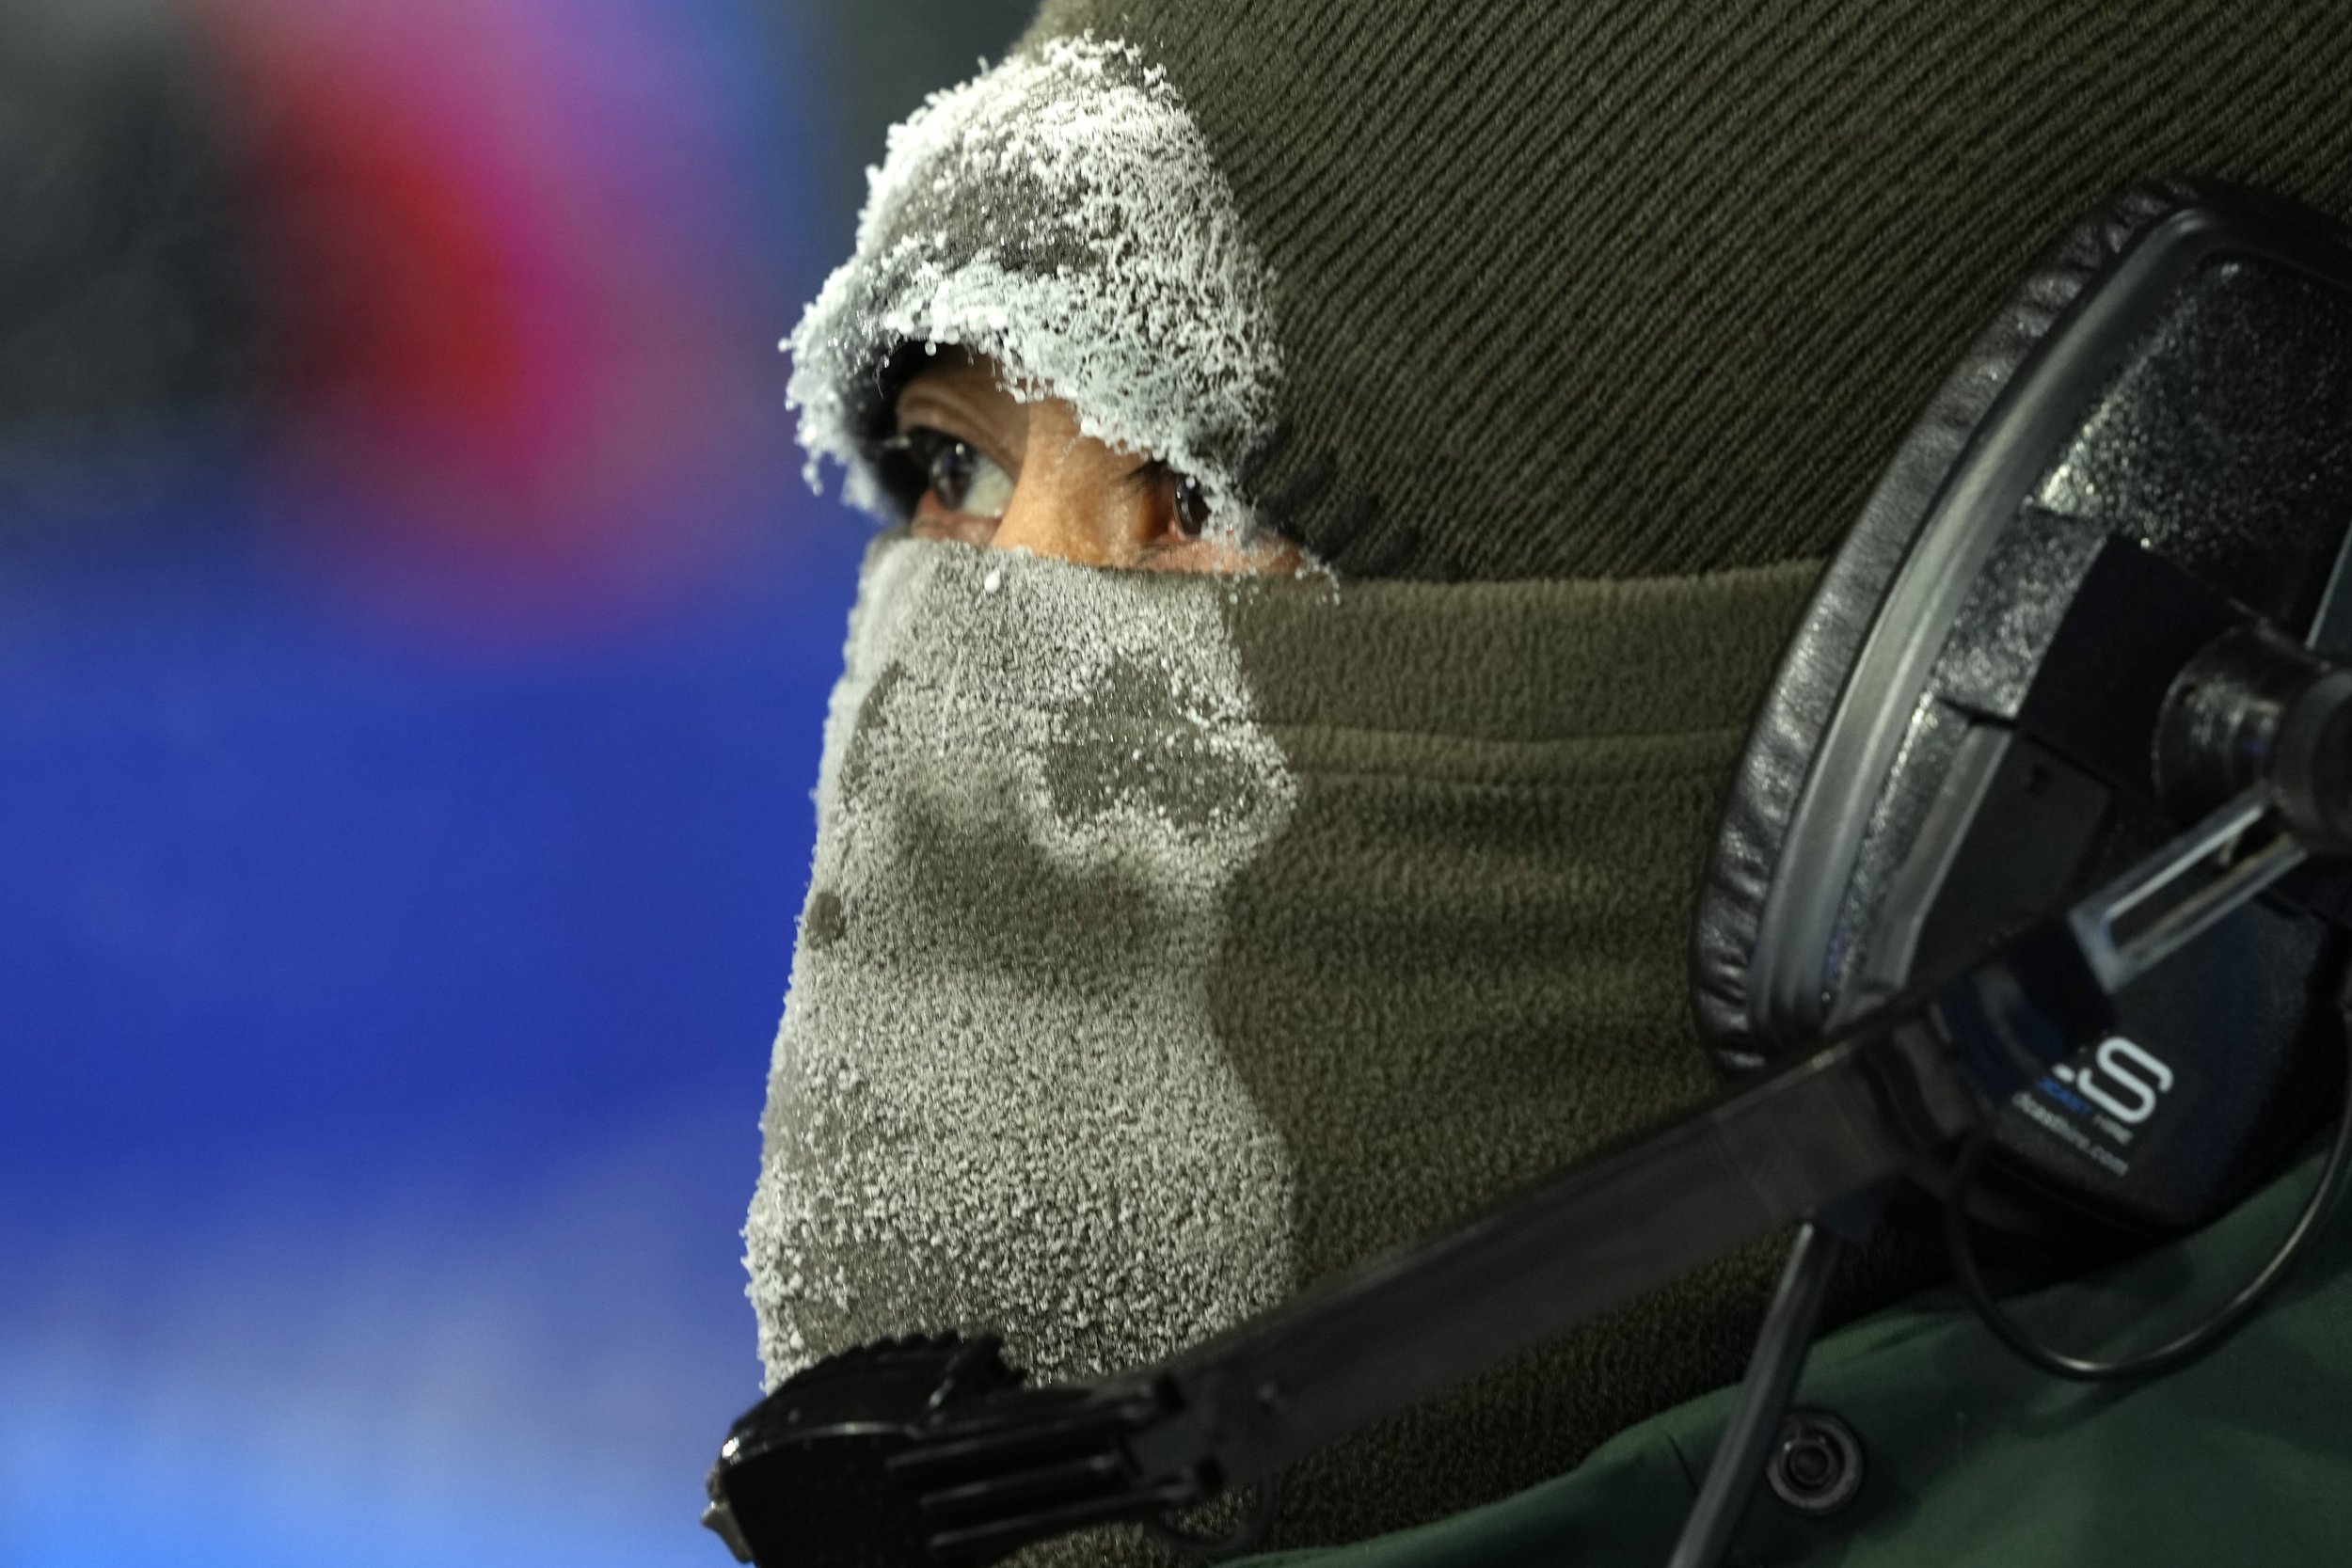  Frost covers the face mask of a broadcast camera operator during the men's aerials finals at the 2022 Winter Olympics, Wednesday, Feb. 16, 2022, in Zhangjiakou, China. (AP Photo/Francisco Seco) 